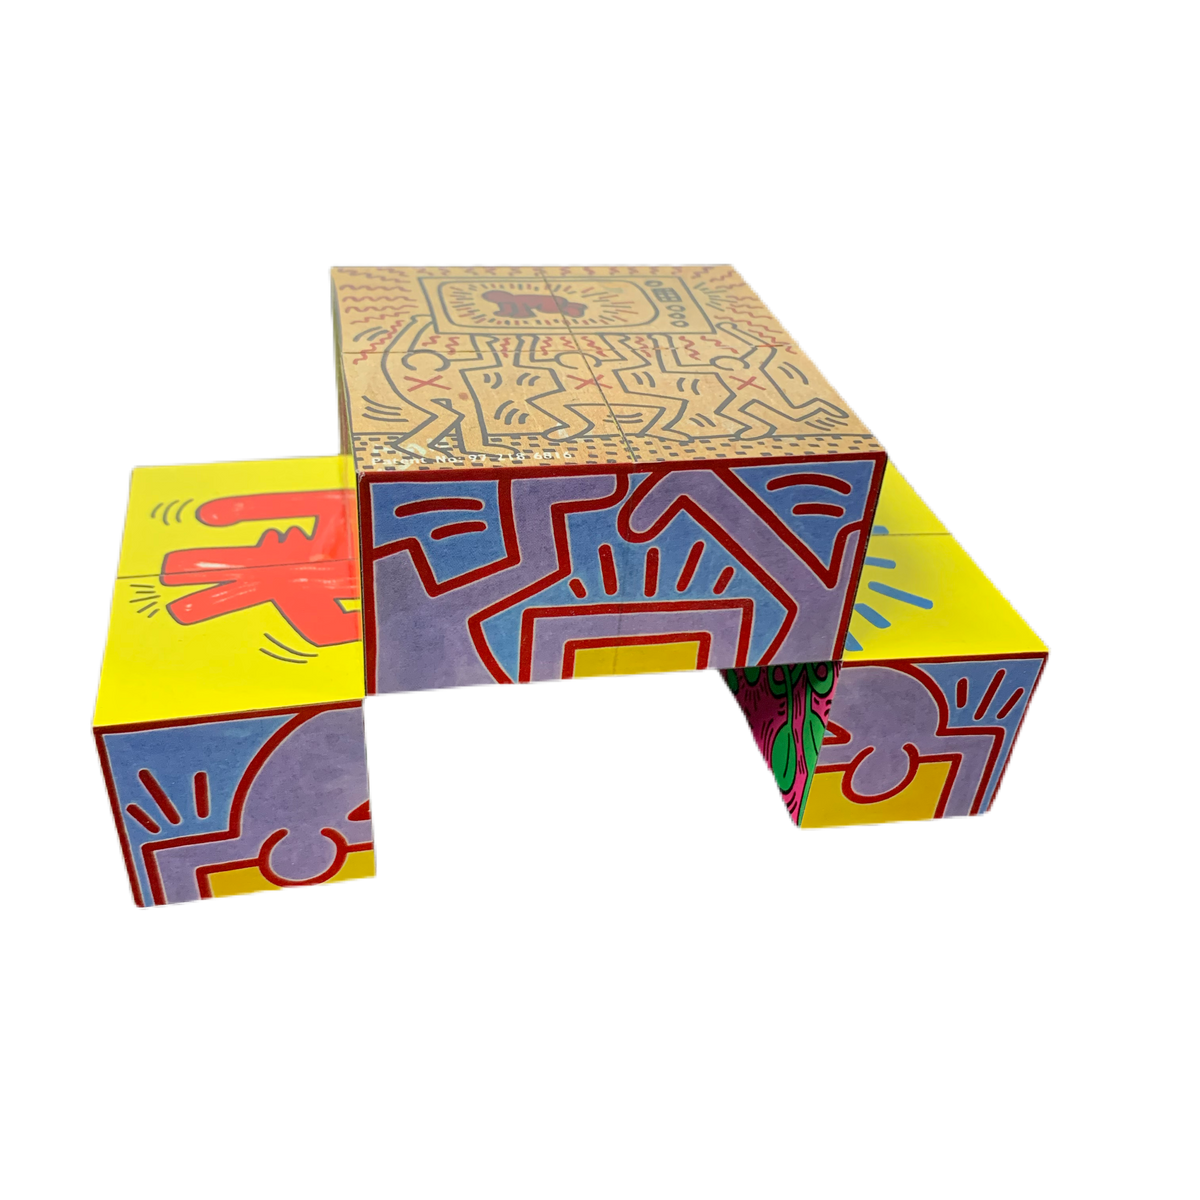 Vintage Keith Haring “Museum Collection” Art Cube